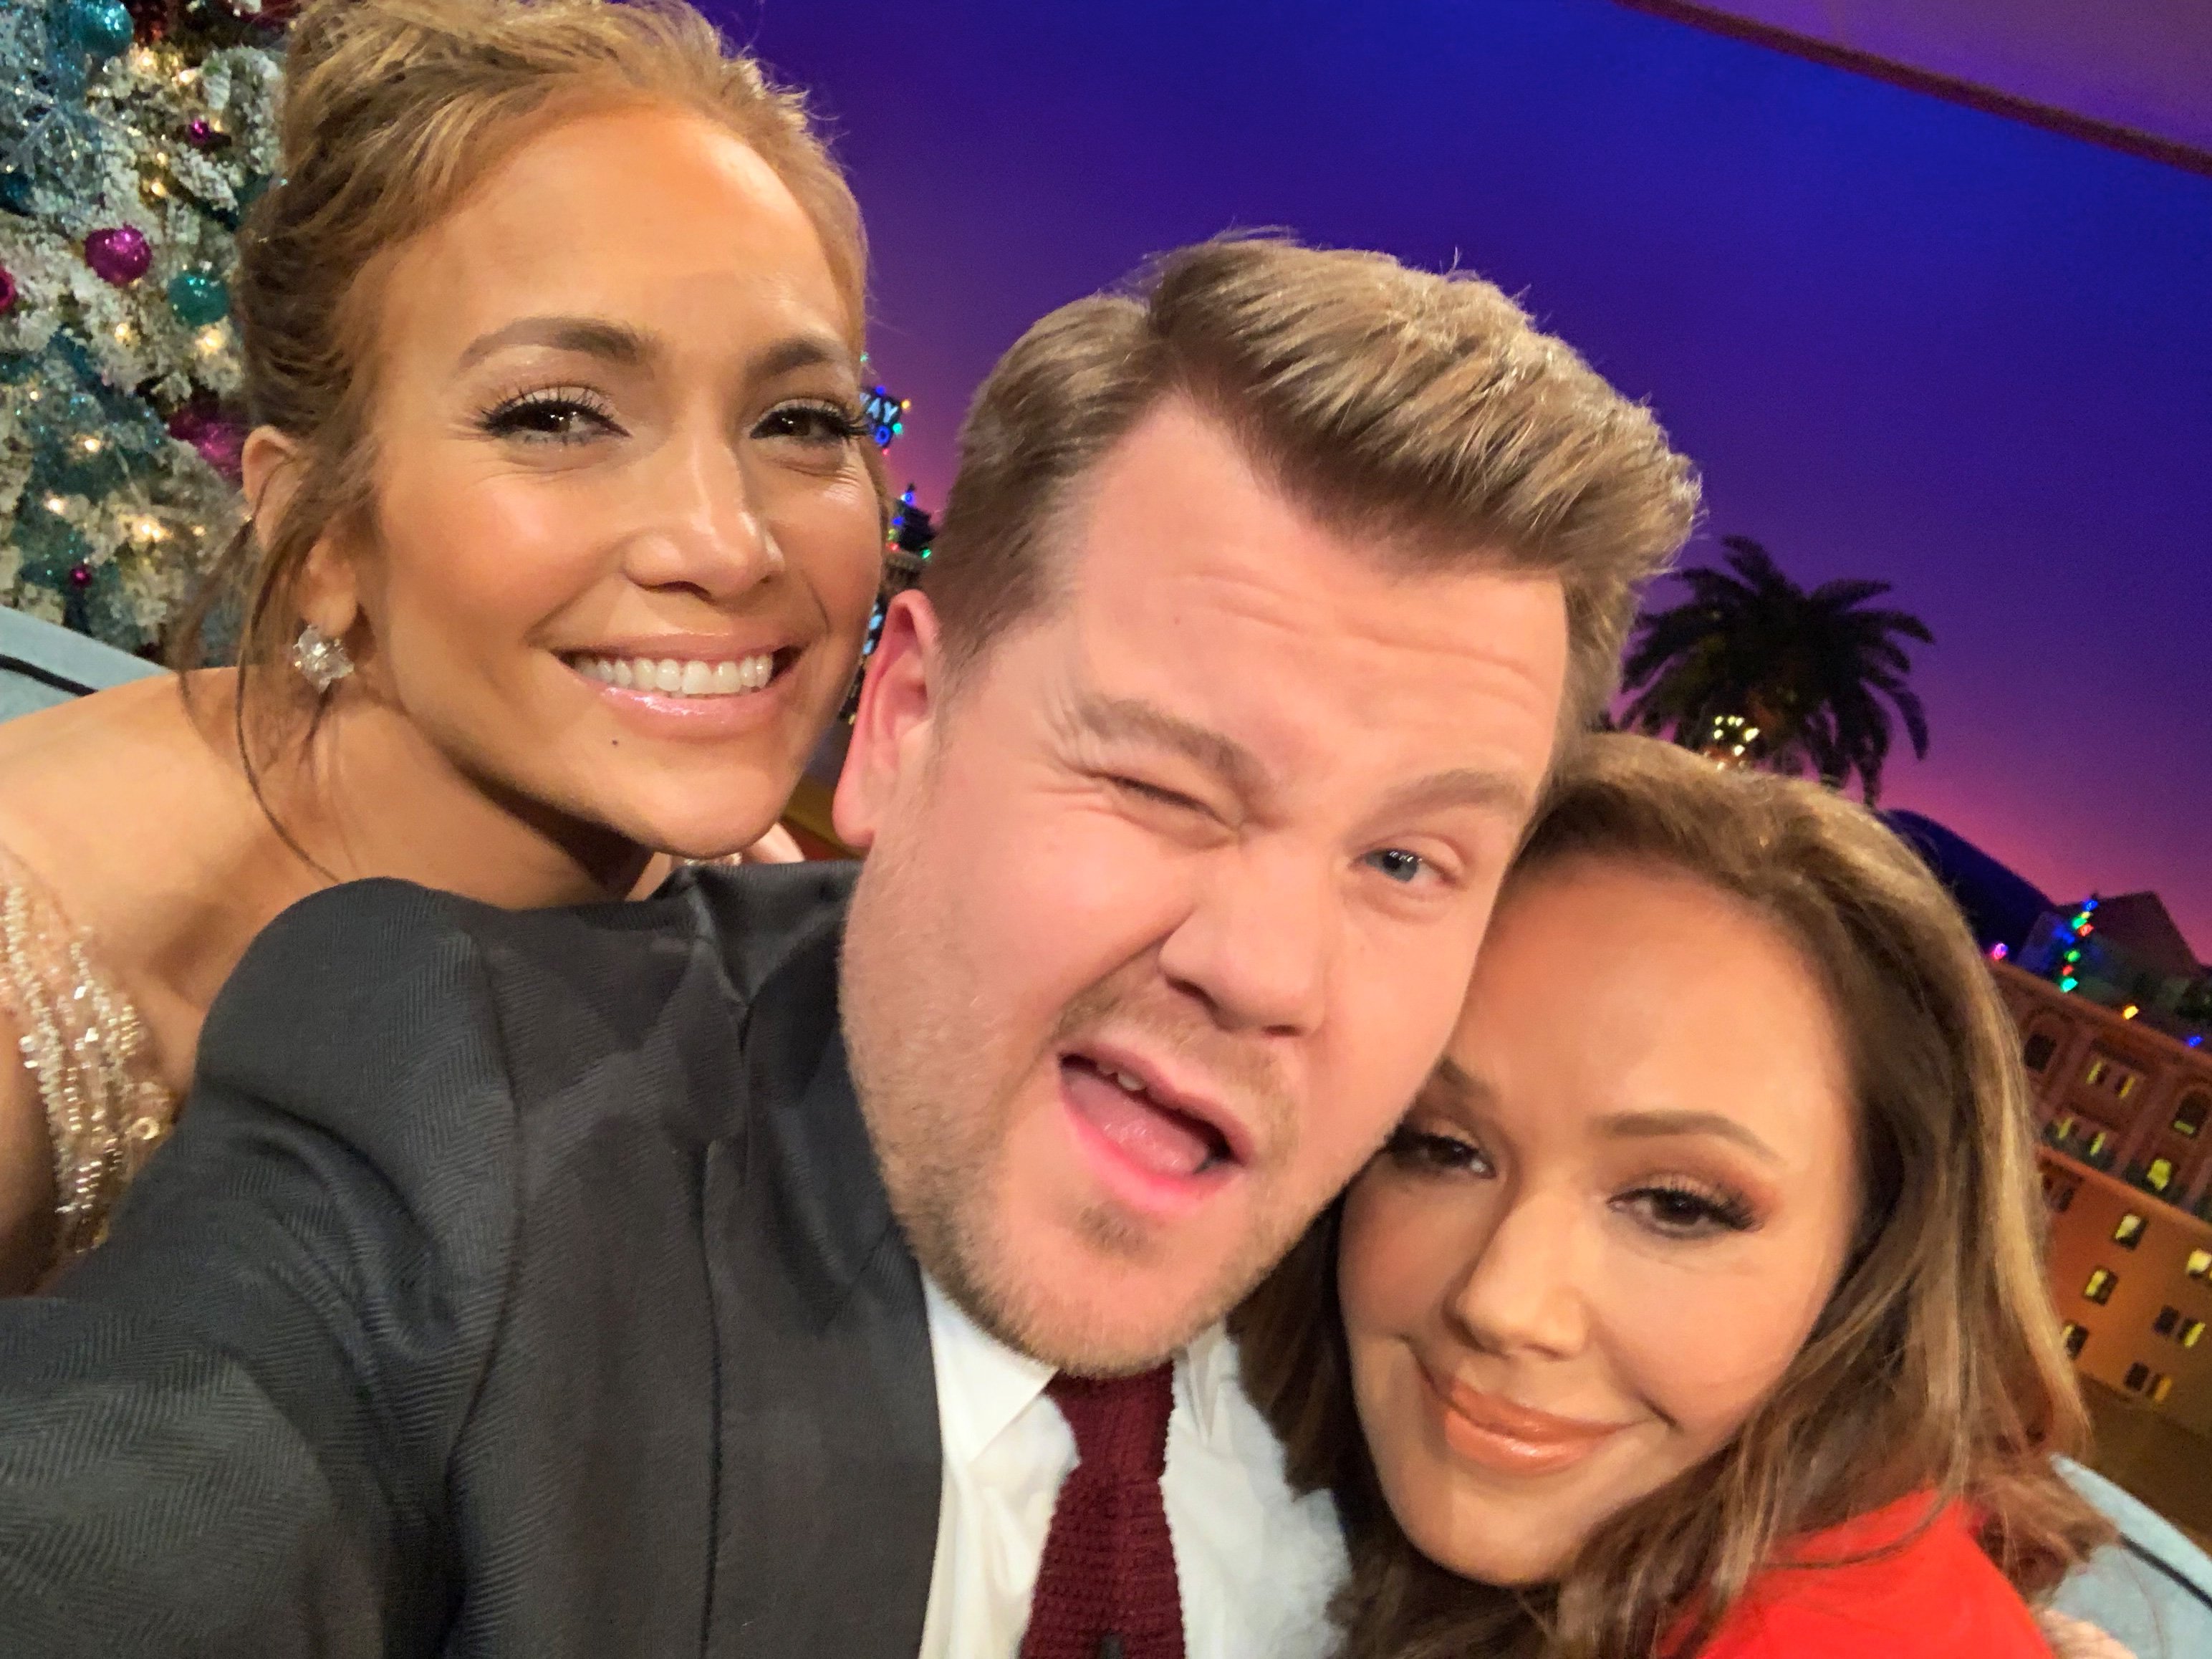 The Late Late Show with James Corden on Twitter: "A must-see show coming your way tonight with @JLo and @LeahRemini + music from @bep AND the first ever #LateLateShow Bake Off featuring